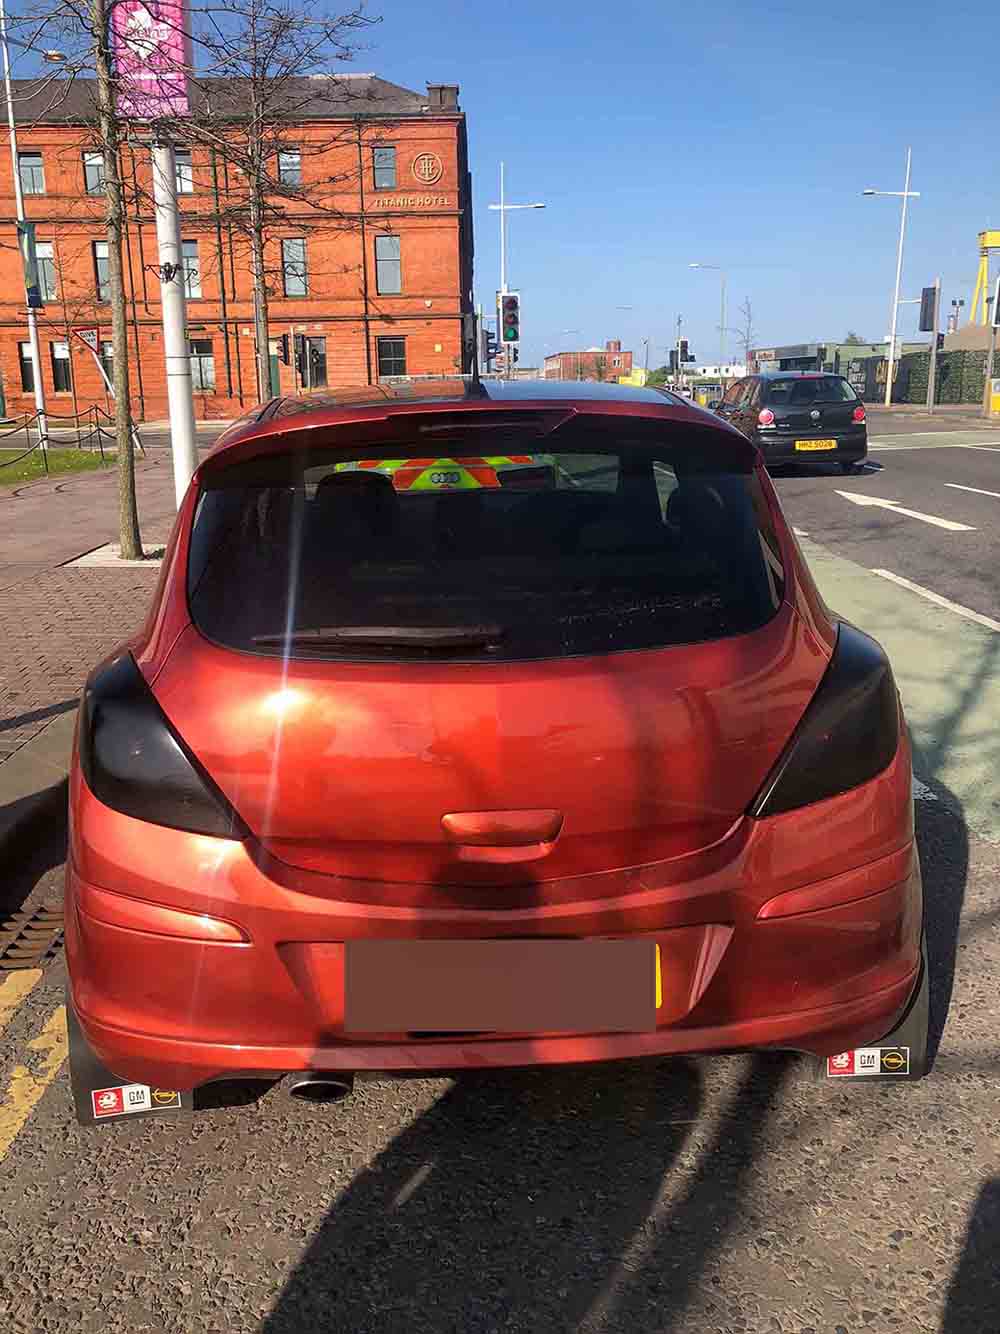 Police fine driver for spray painting tail lights - Police News